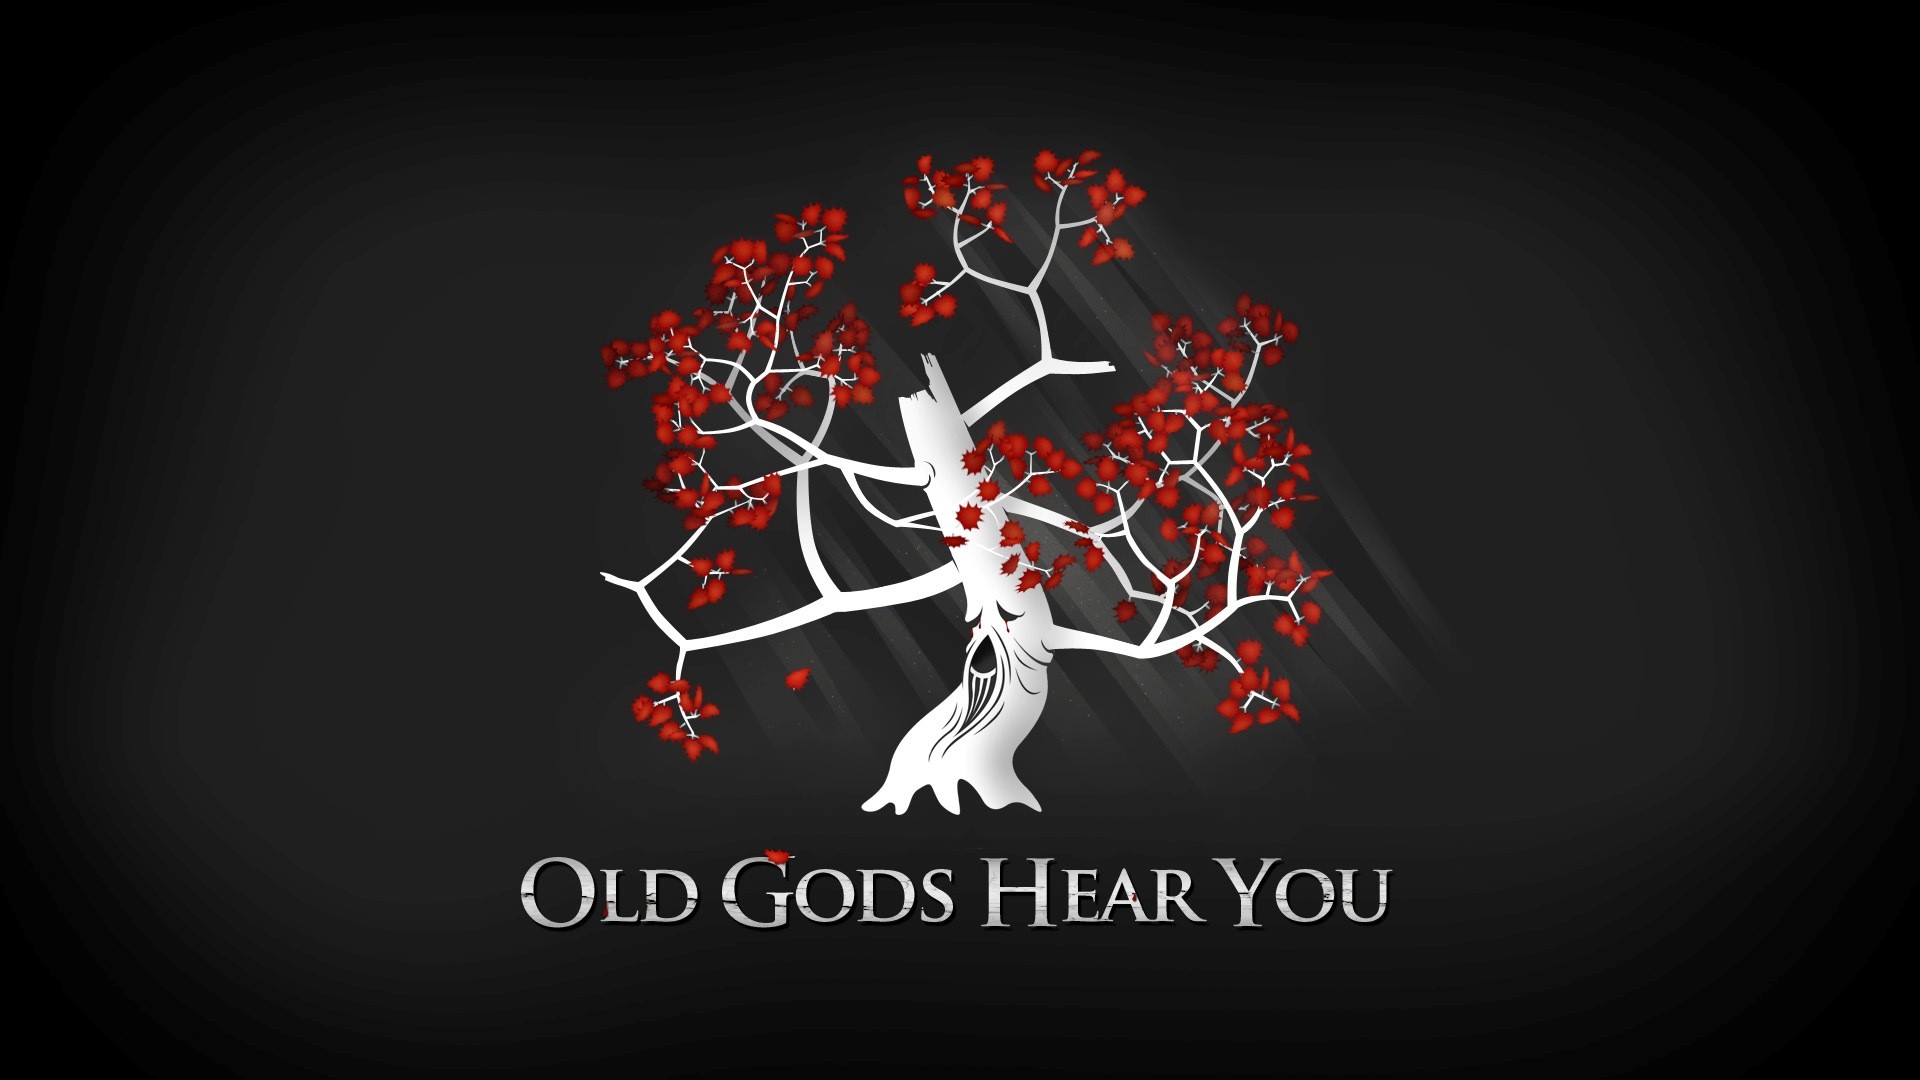 Game Of Thrones Old Gods Hear You Quotes Wallpaper Wallpaper